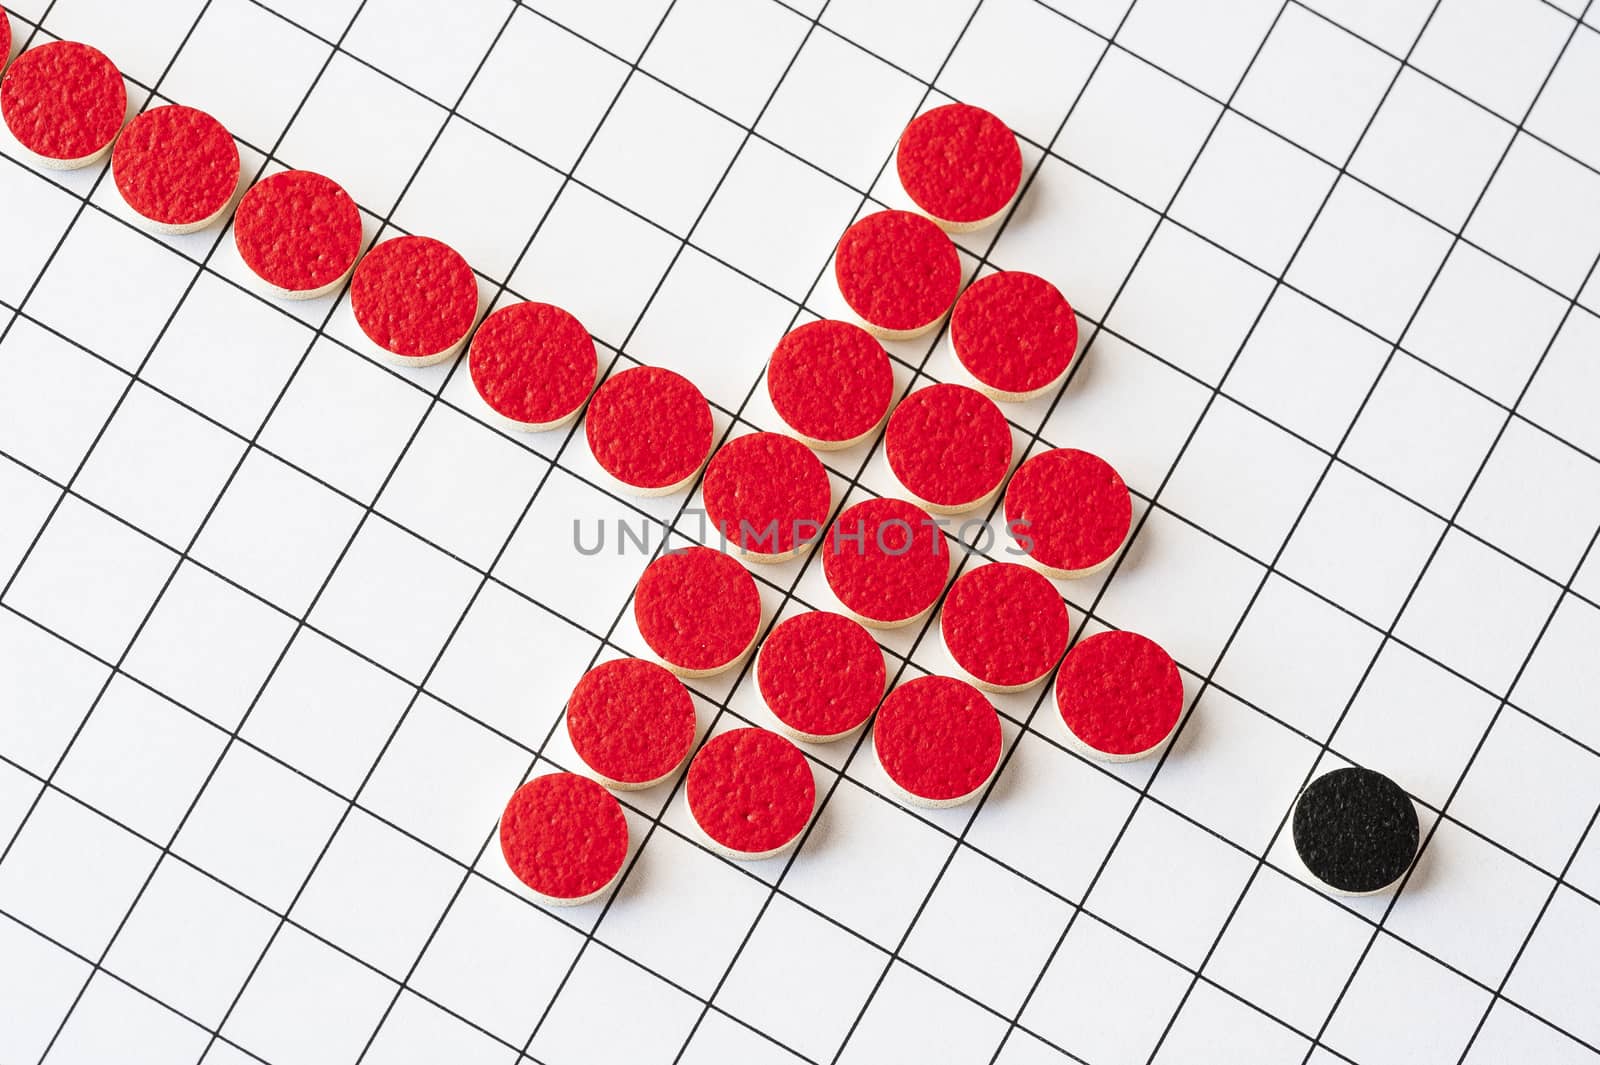 Stylised graphic of a thrust against a small and weak opponent, created using counters from a game of 'Go'.